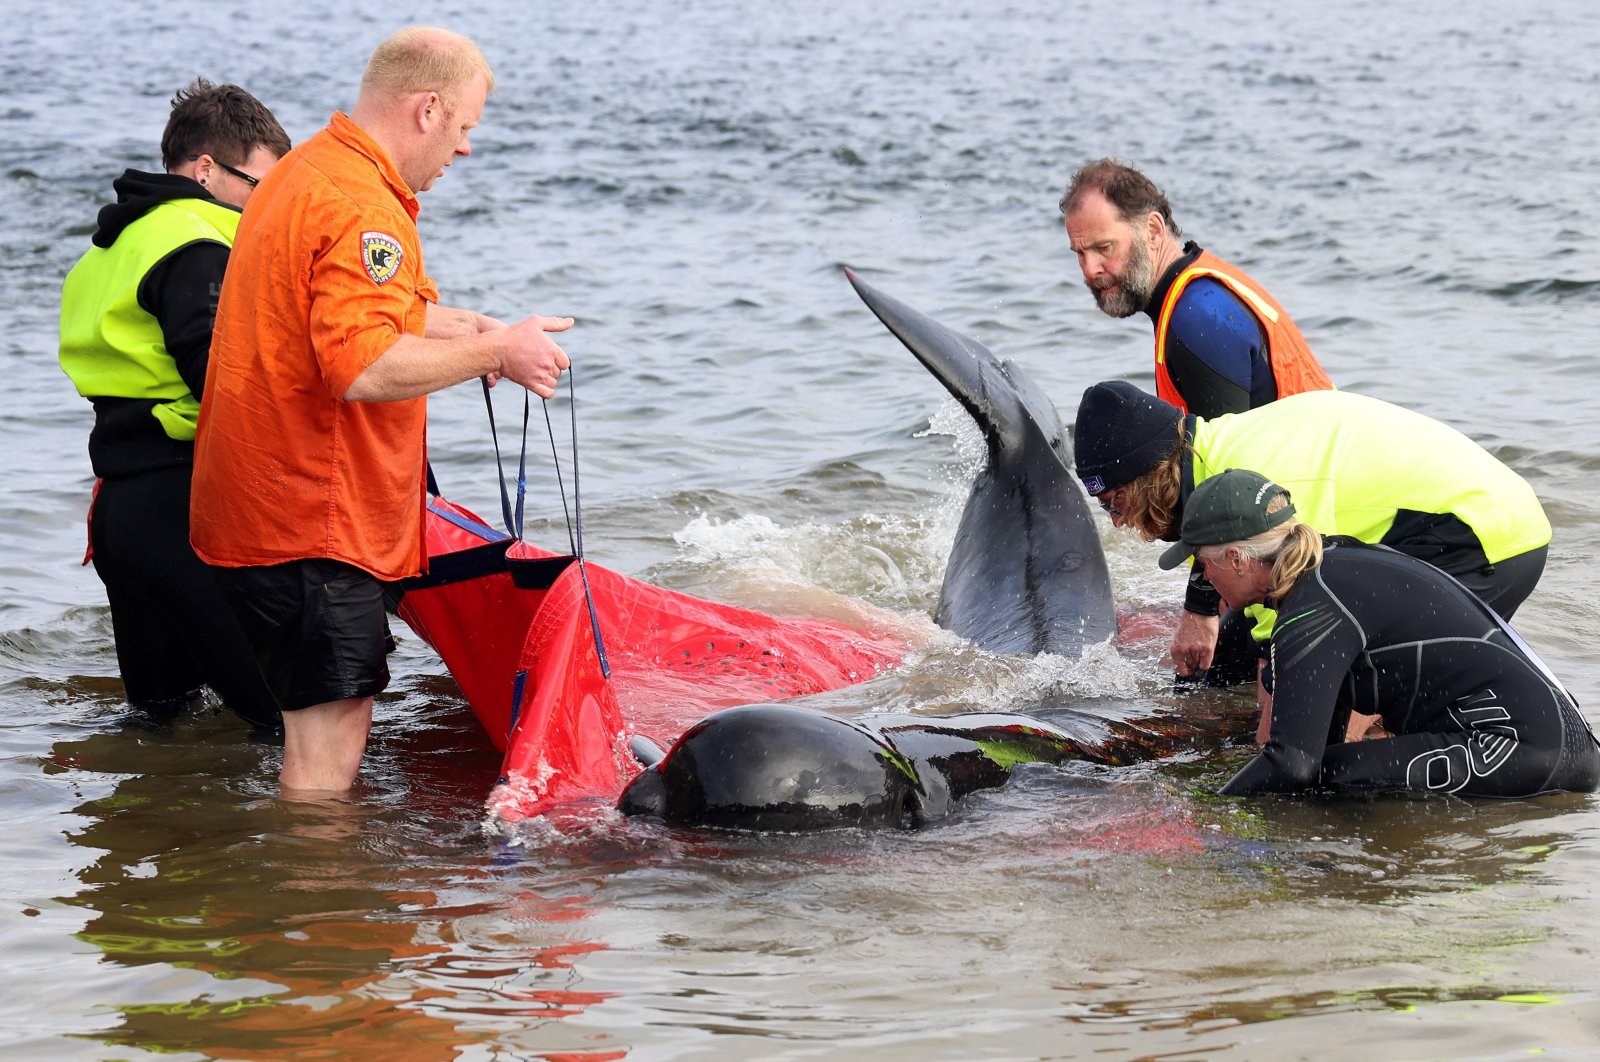 Rescuers release a stranded pilot whale back in the ocean at Macquarie Heads, on the west coast of Tasmania, Sept. 22, 2022. (AFP Photo)